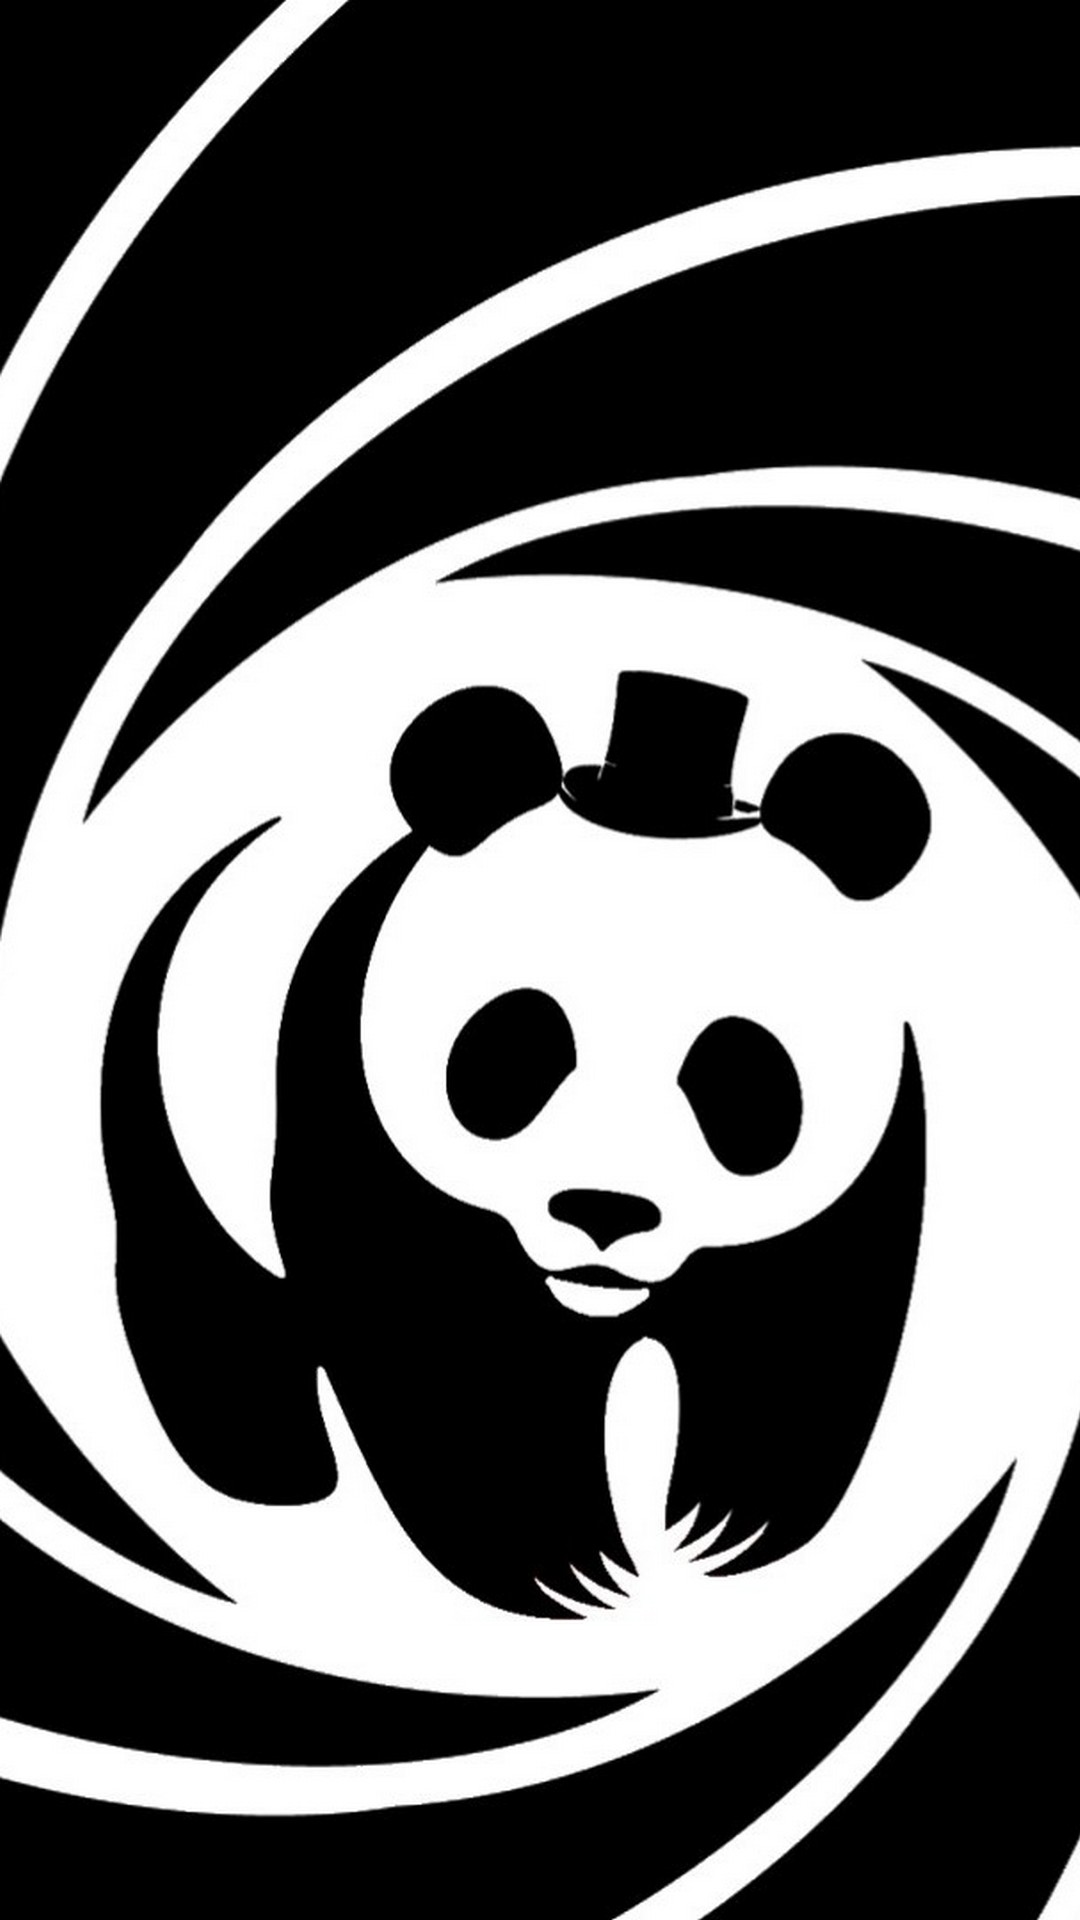 Android Wallpaper HD Panda with HD resolution 1080x1920